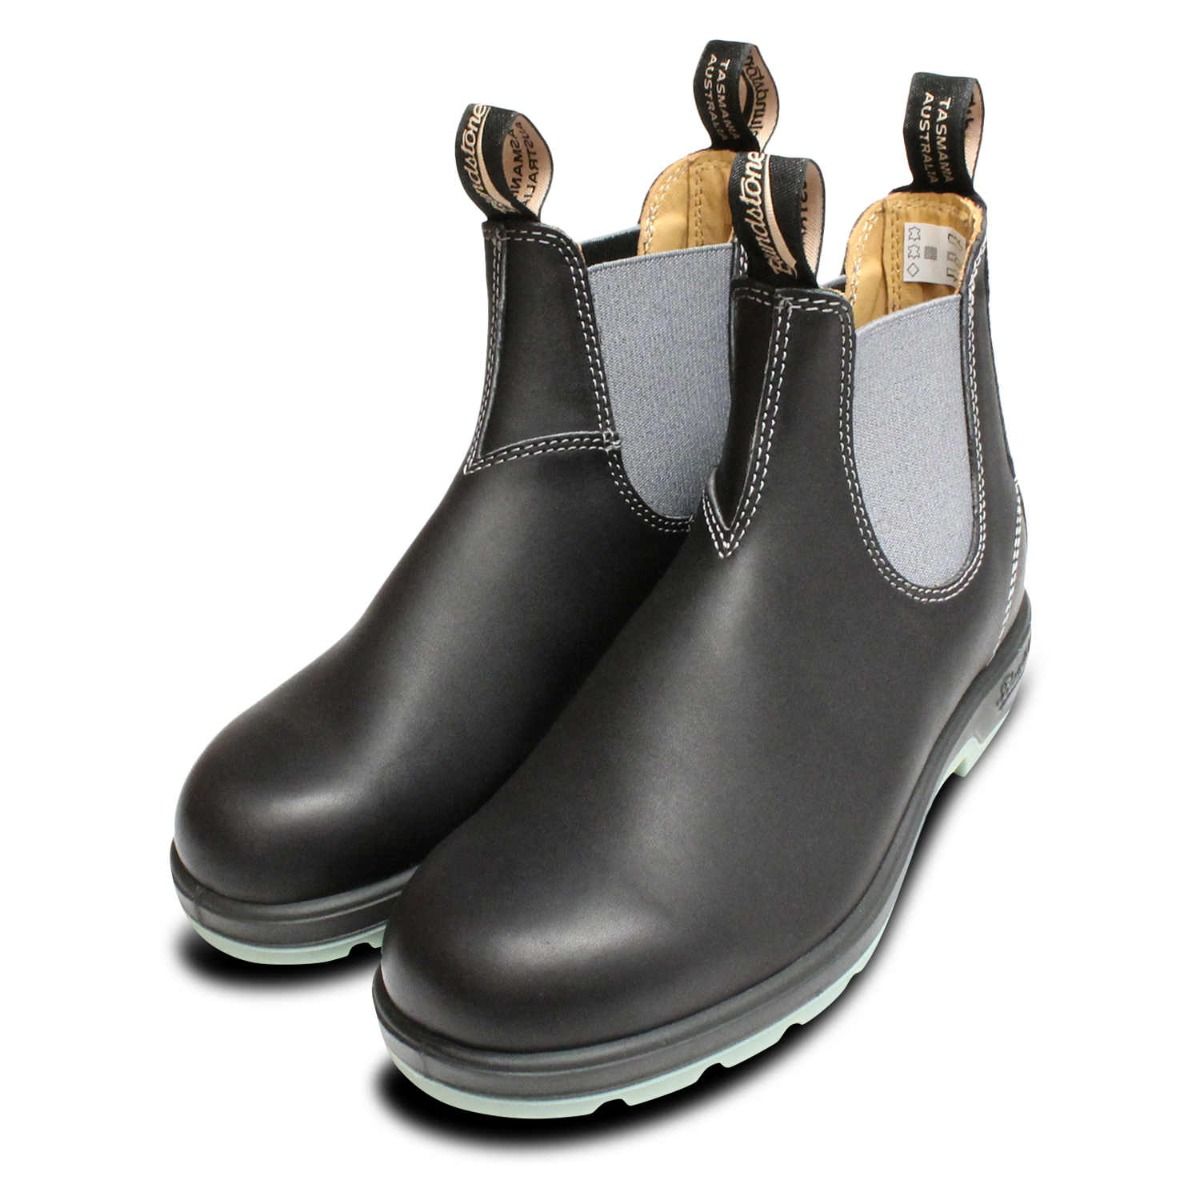 blundstone shoes on sale